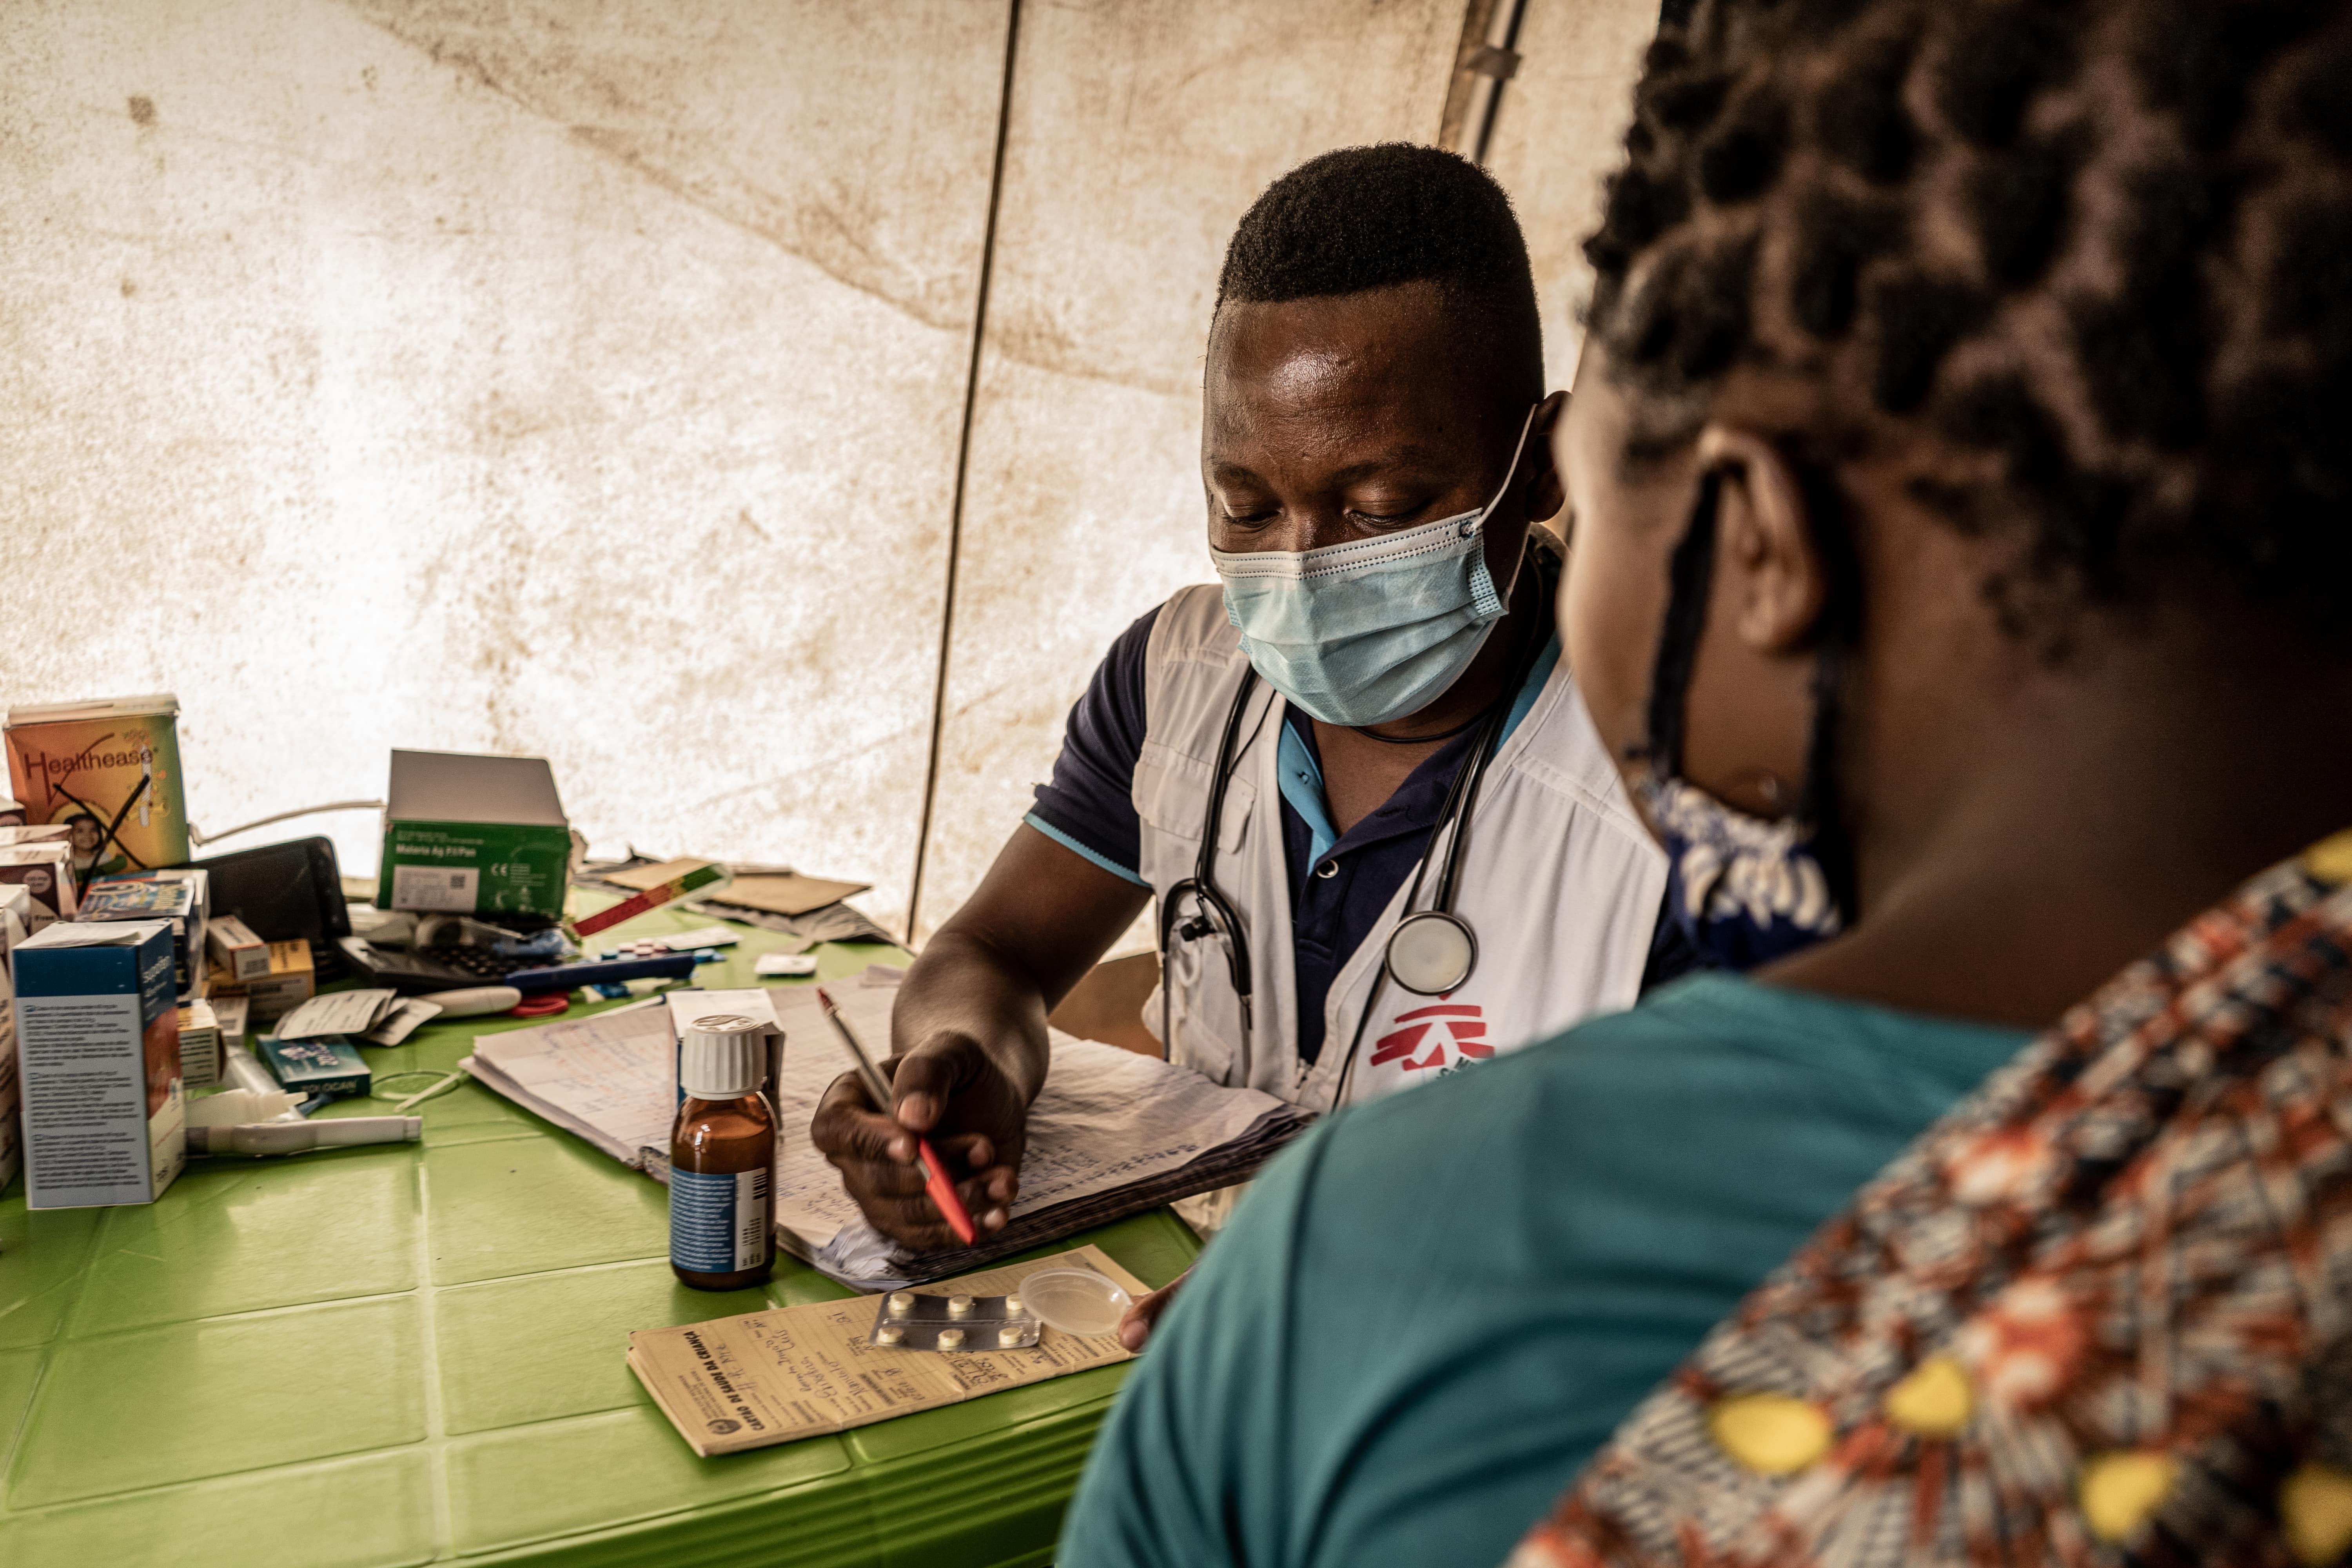 40 Years of Medical Services in Mozambique: Physician, Nazario Jaime, is seen during a consultation with a patient living in the Nicuapa site in Cabo Delgado province.